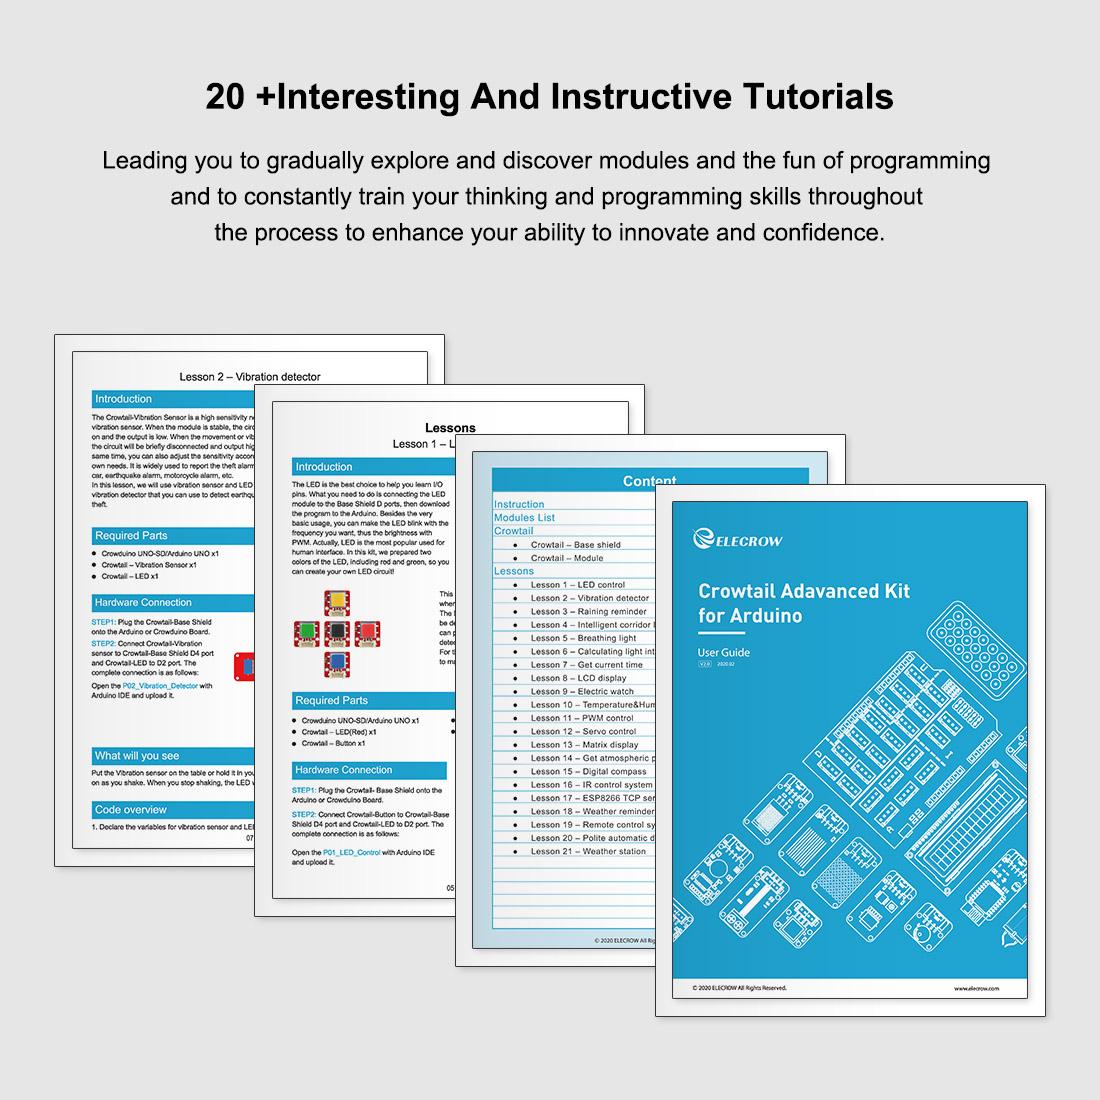 Arduino kit comes with 20+ interesting tutorials